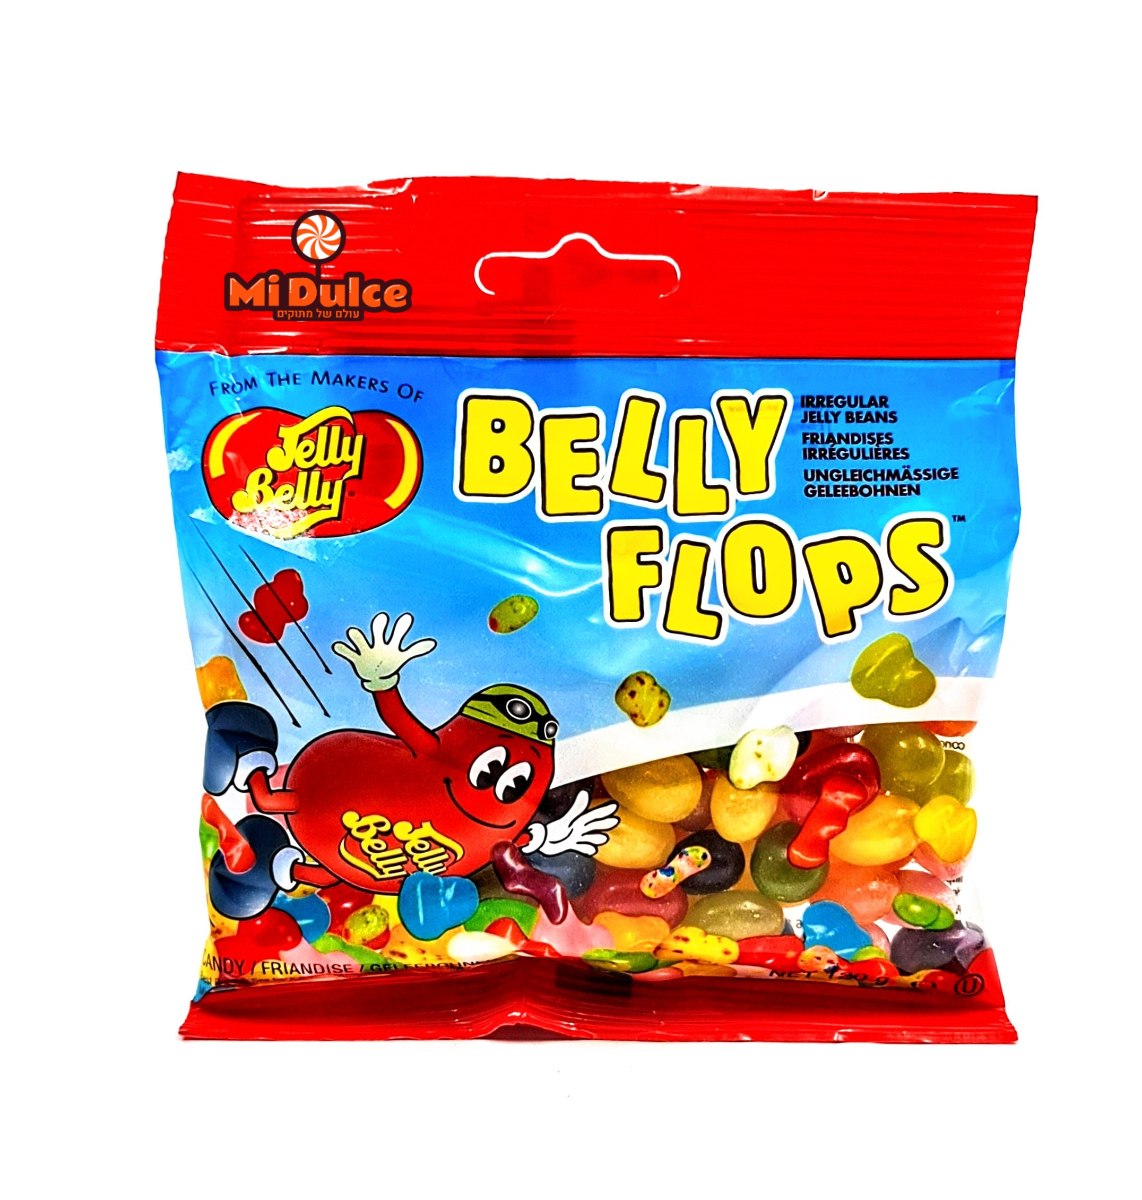 Jelly Belly Flops